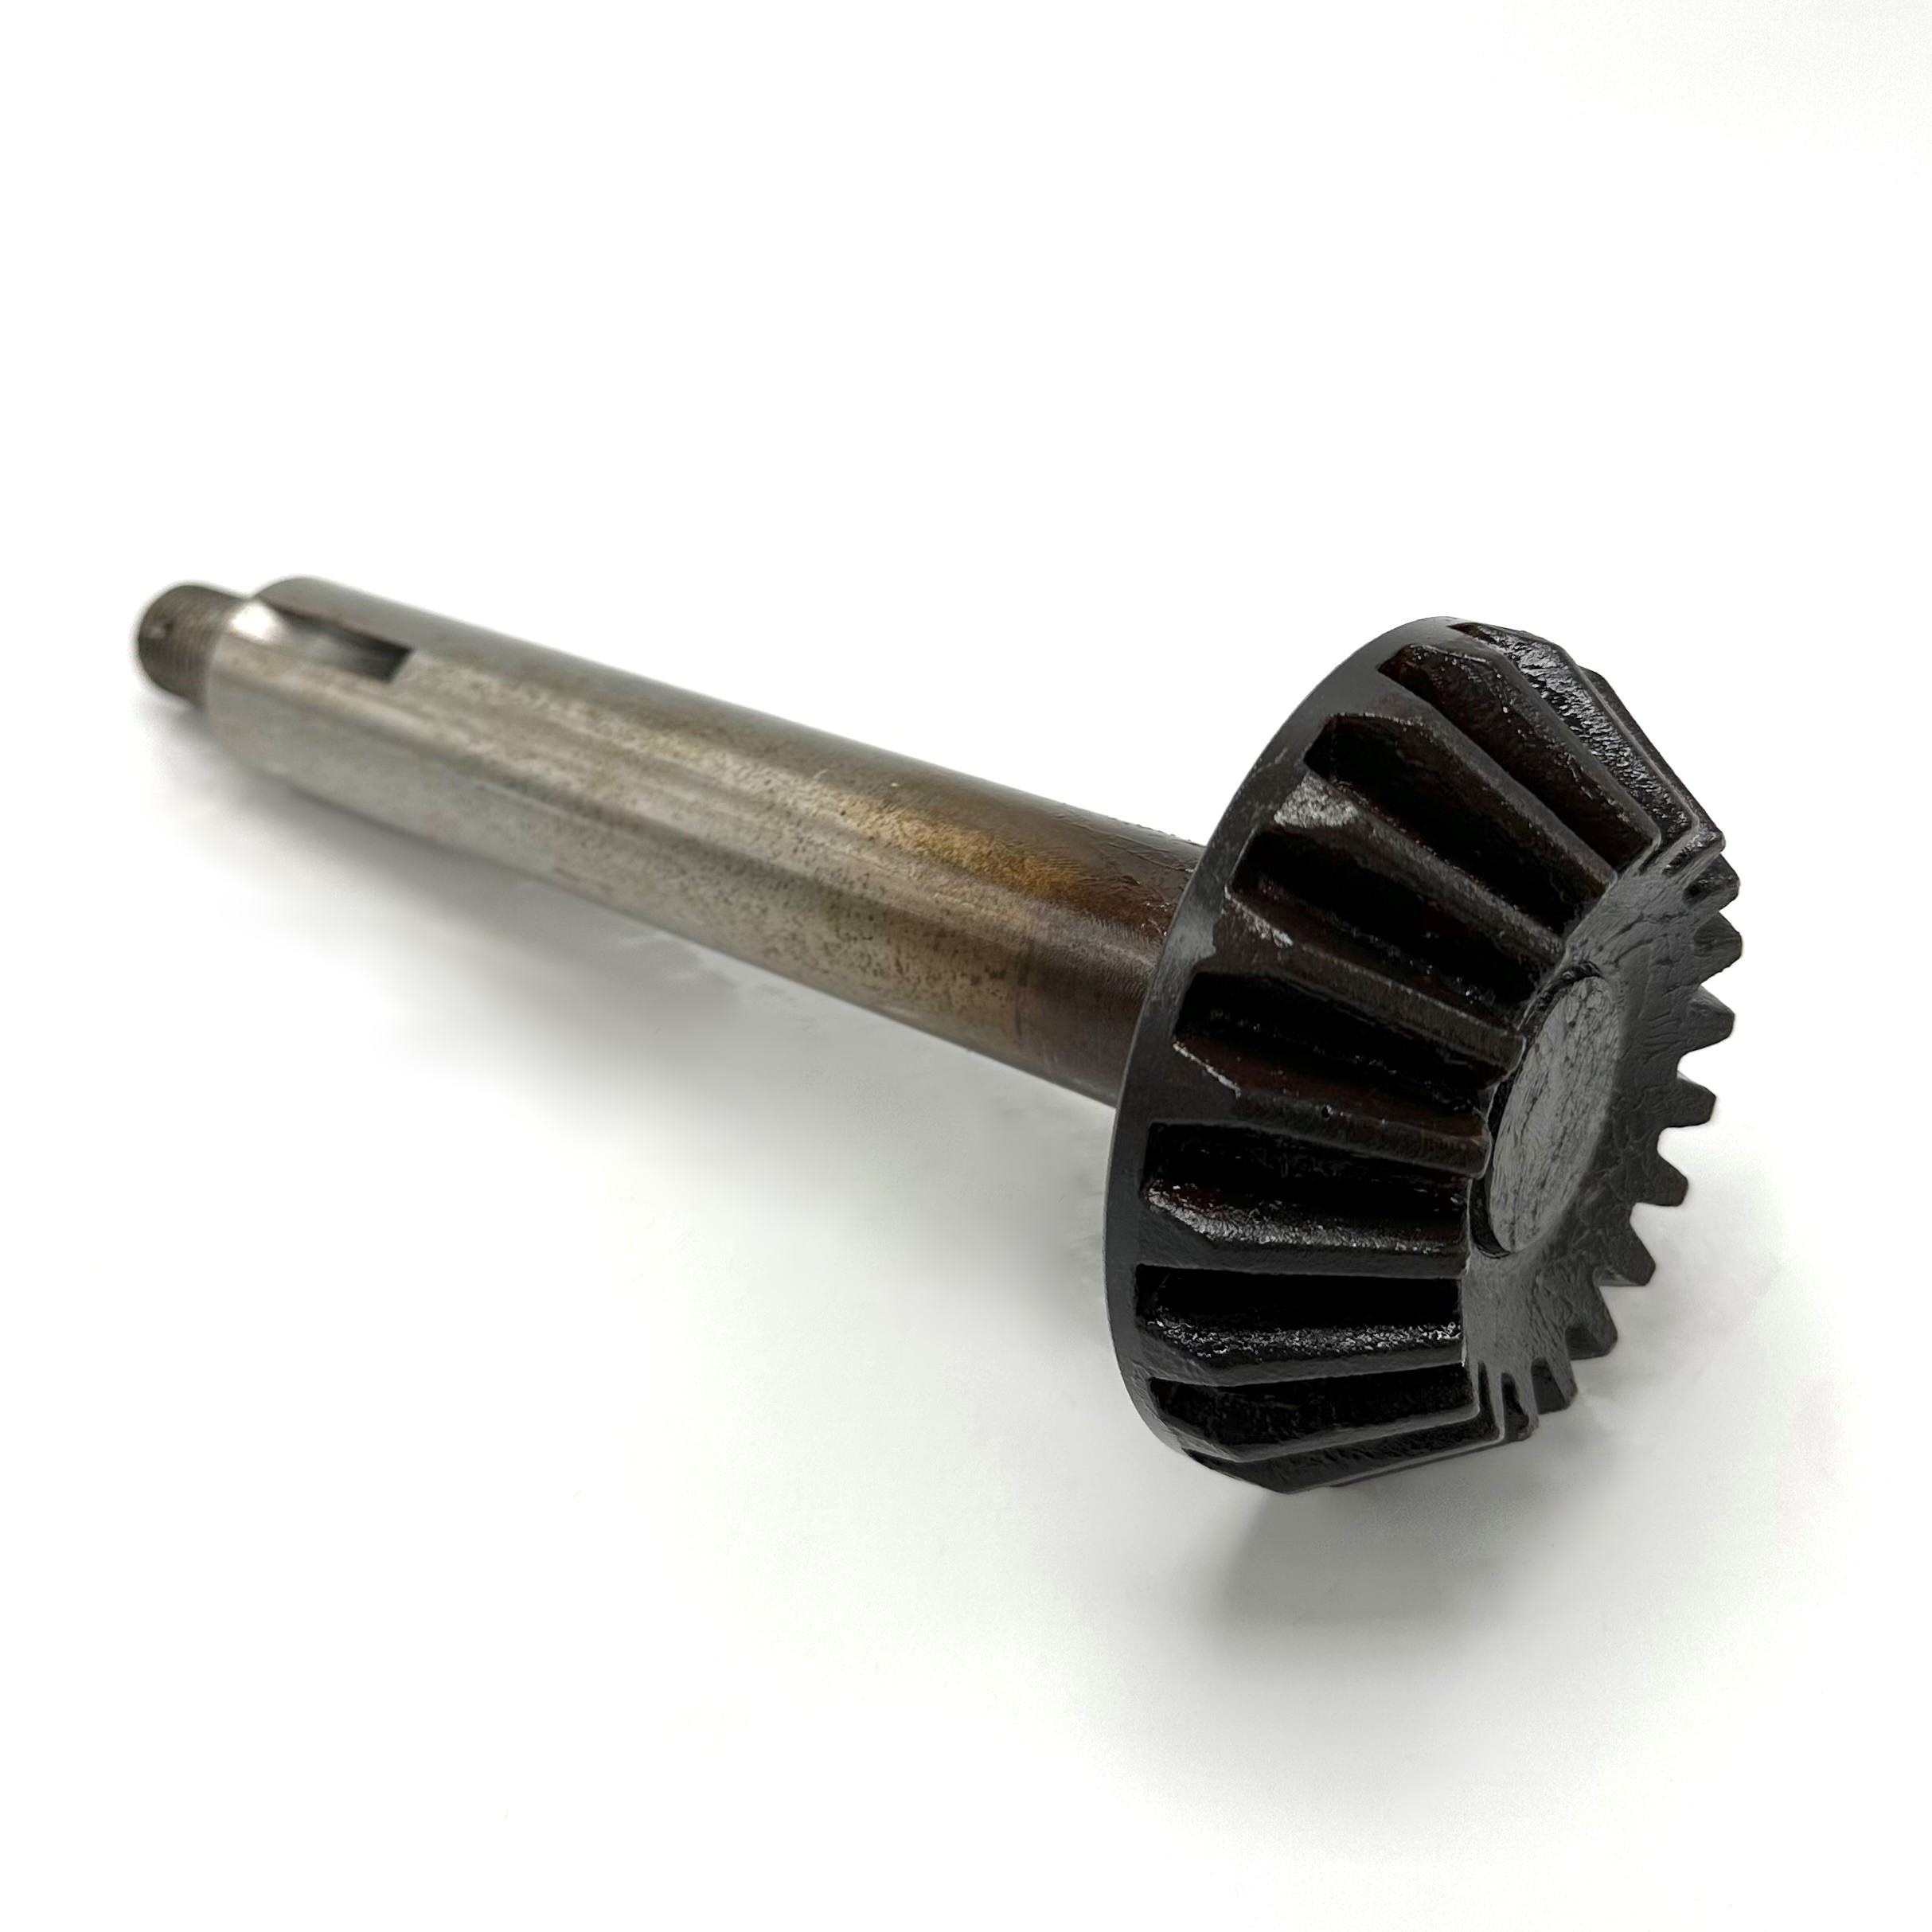 NHRK48185 Gearbox Shaft - Replaces 48185